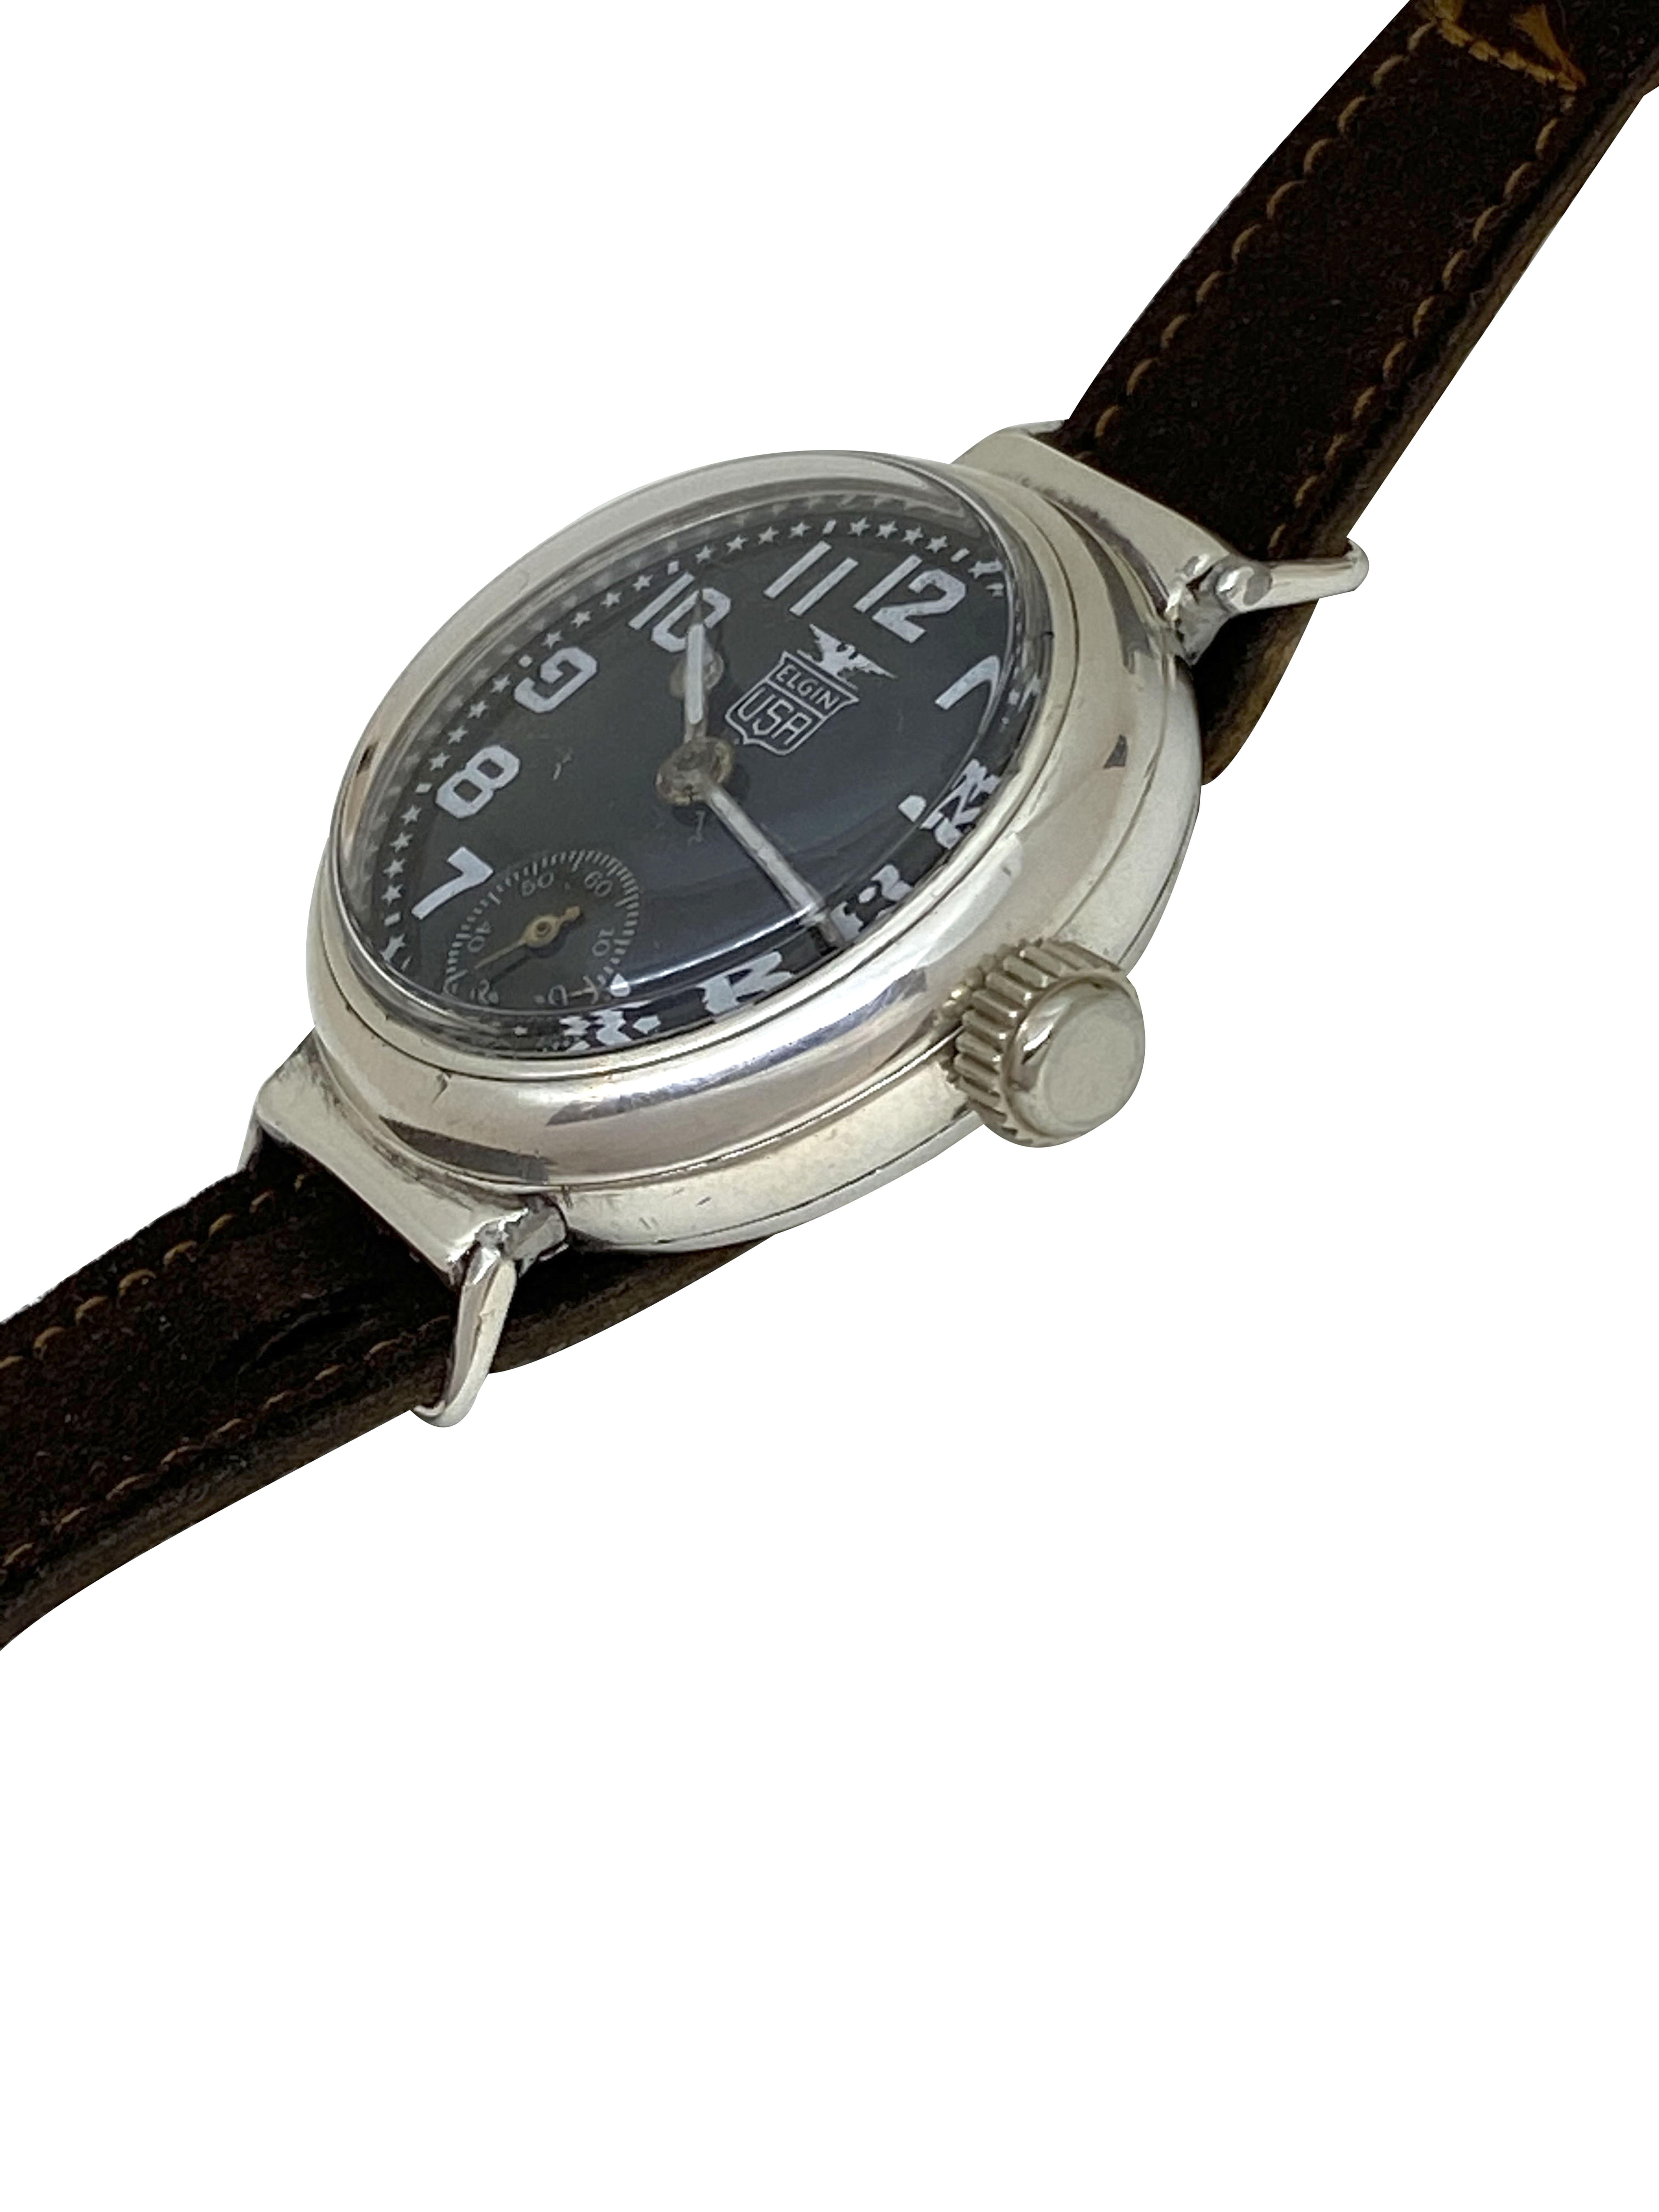 Circa 1919 Elgin Military style Trench Wrist Watch, 31 M.M. Sterling Silver 3 Piece case with Solid heavy wire lugs, 7 jewel Elgin, grade 2, Model 462 Mechanical, Manual wind movement. Black Enameled Metal dial with White Numerals and an outer track